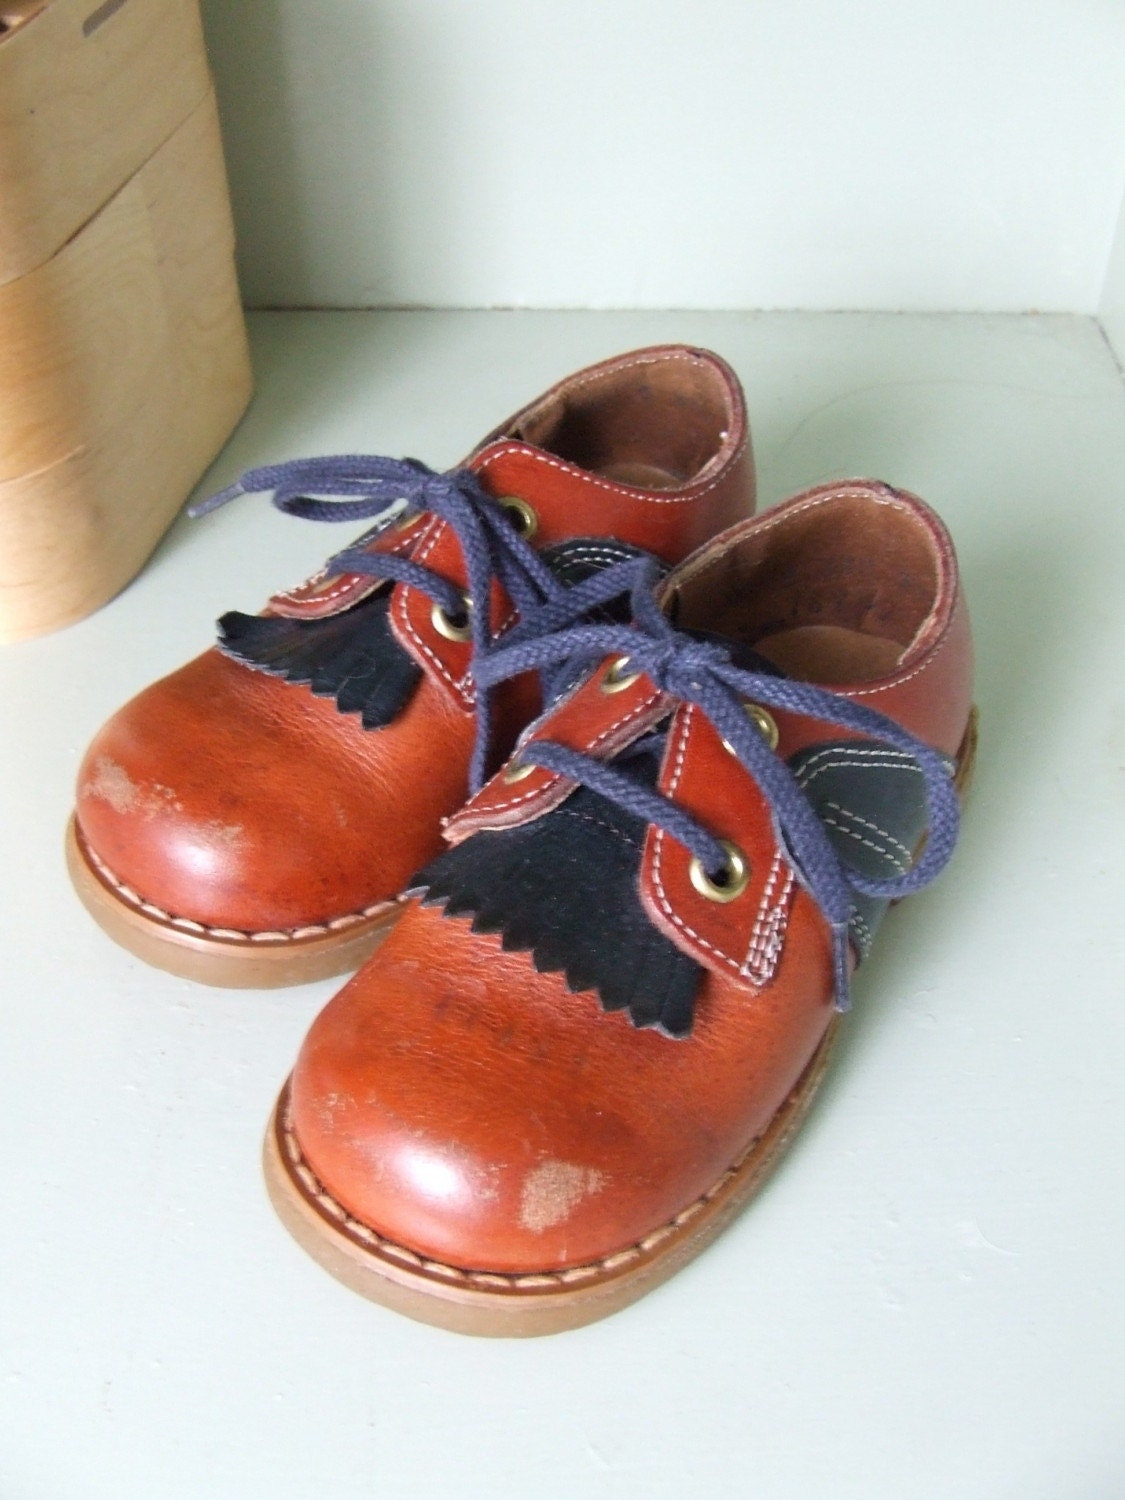 Little Dude Shoes Vintage Buster Brown Loafers Navy Russet